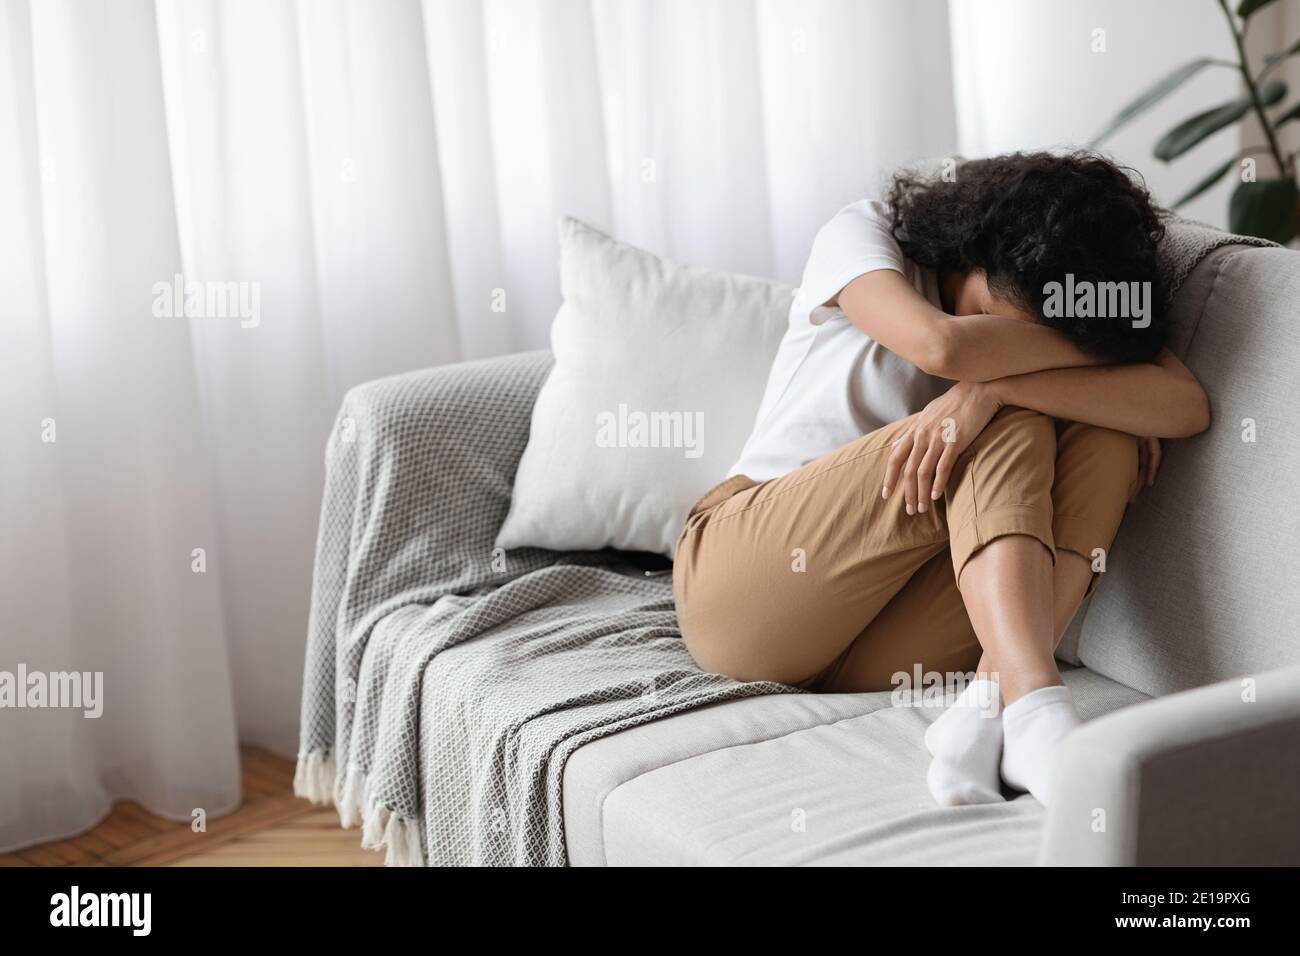 Depressed brunette woman sitting on couch alone, crying Stock Photo